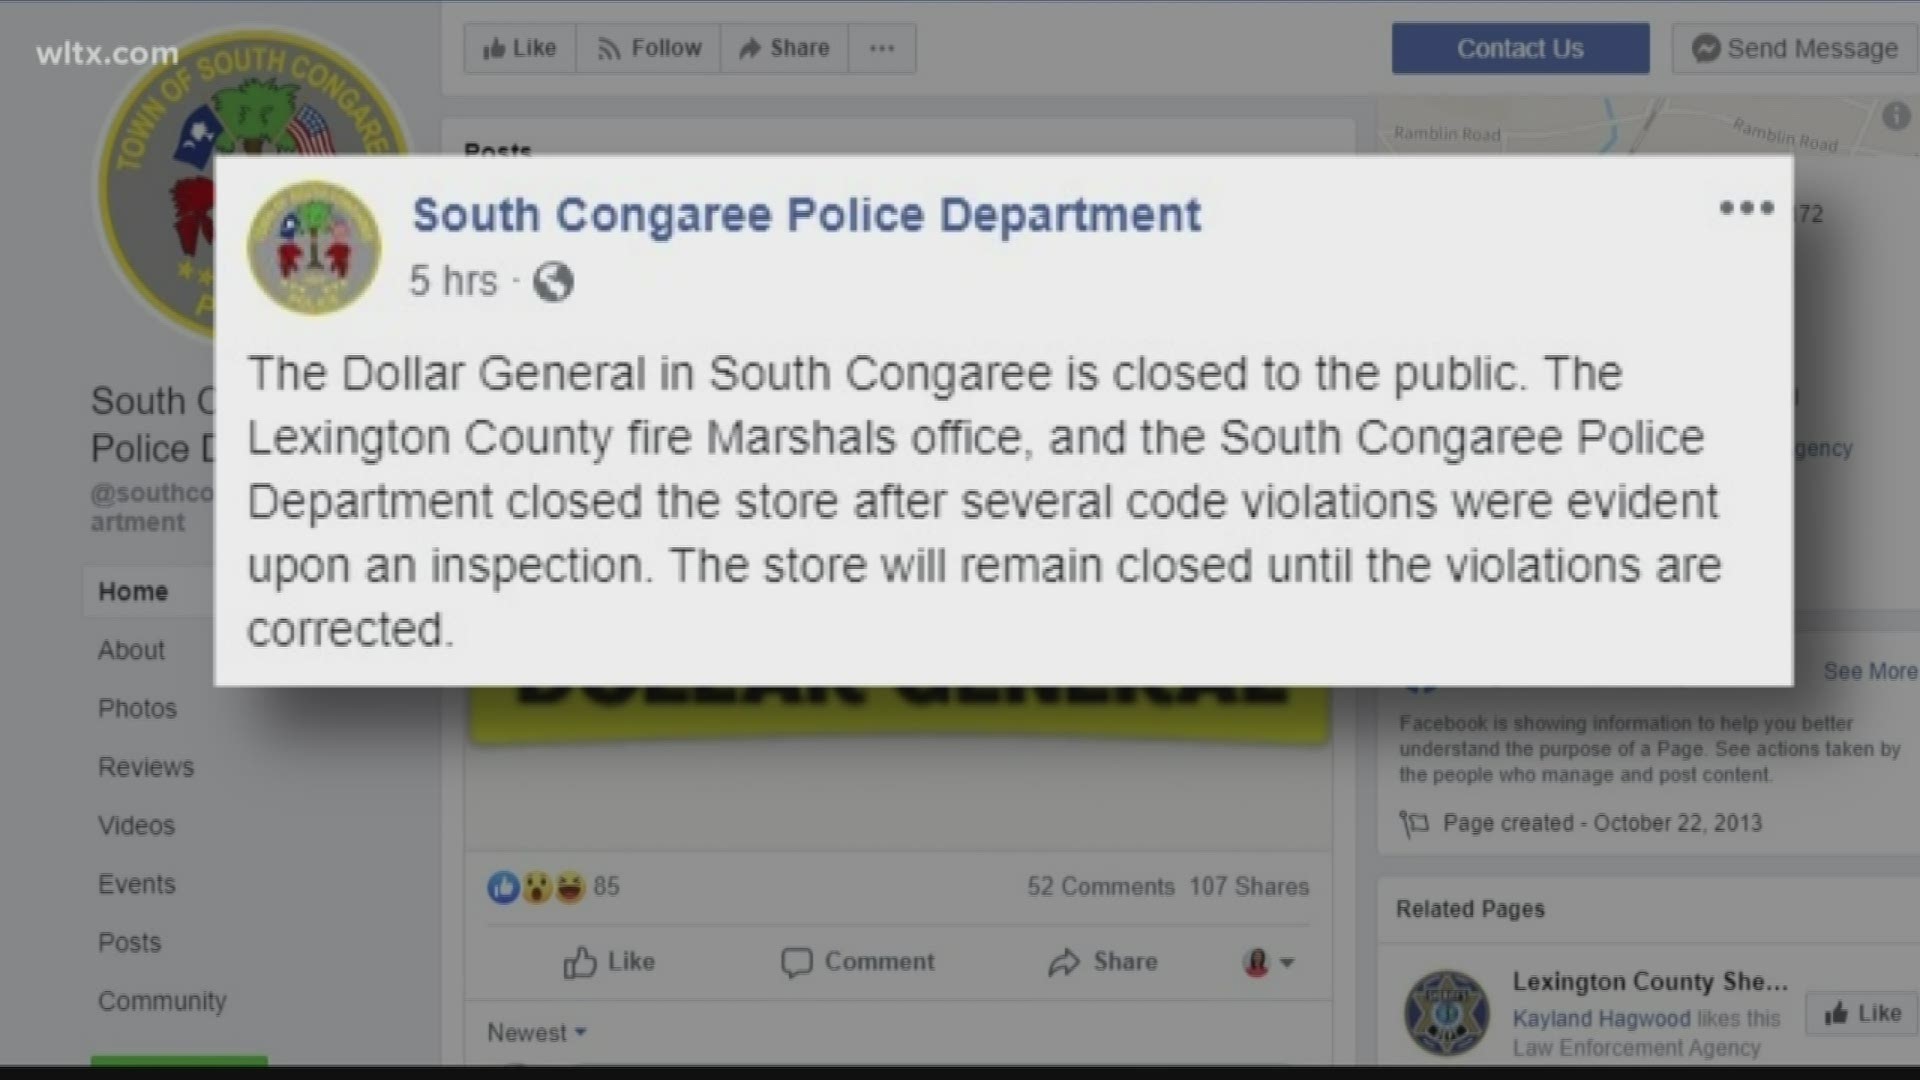 The Dollar General store in South Congaree has been shut down due to code violations.